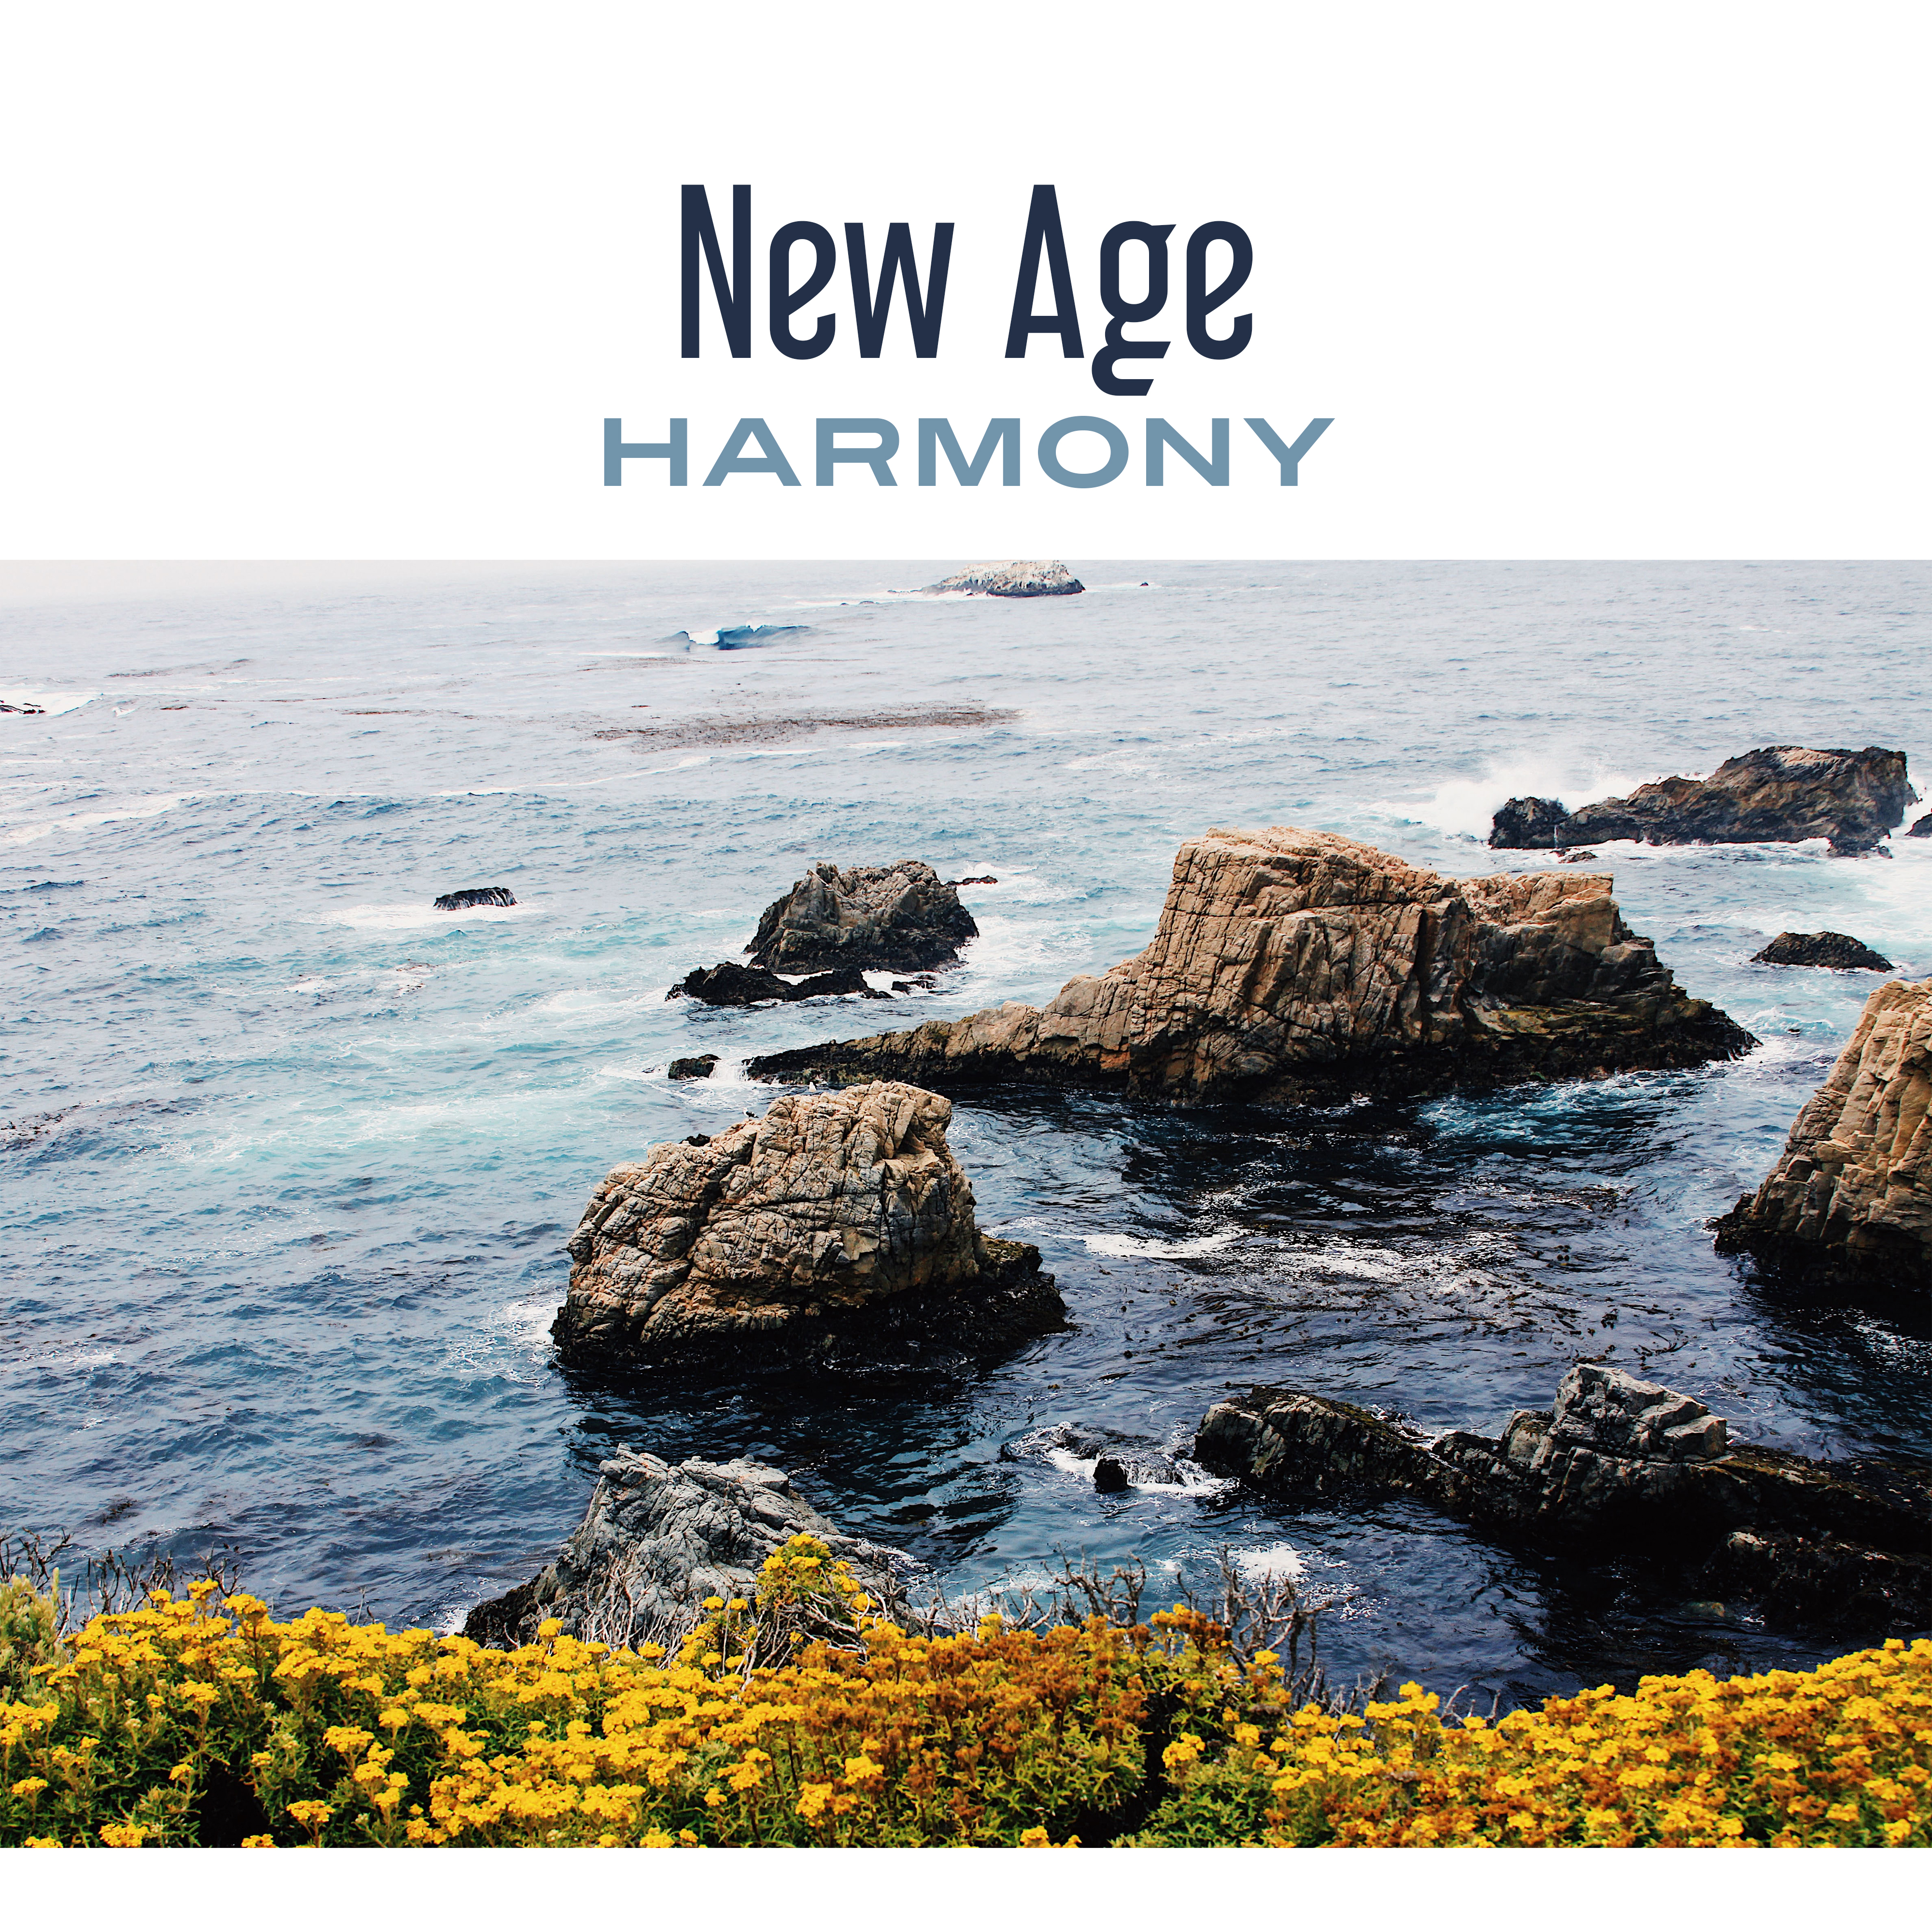 New Age Harmony – Sounds for Relax, Rest with New Age Music, Self Improvement, Inner Peace